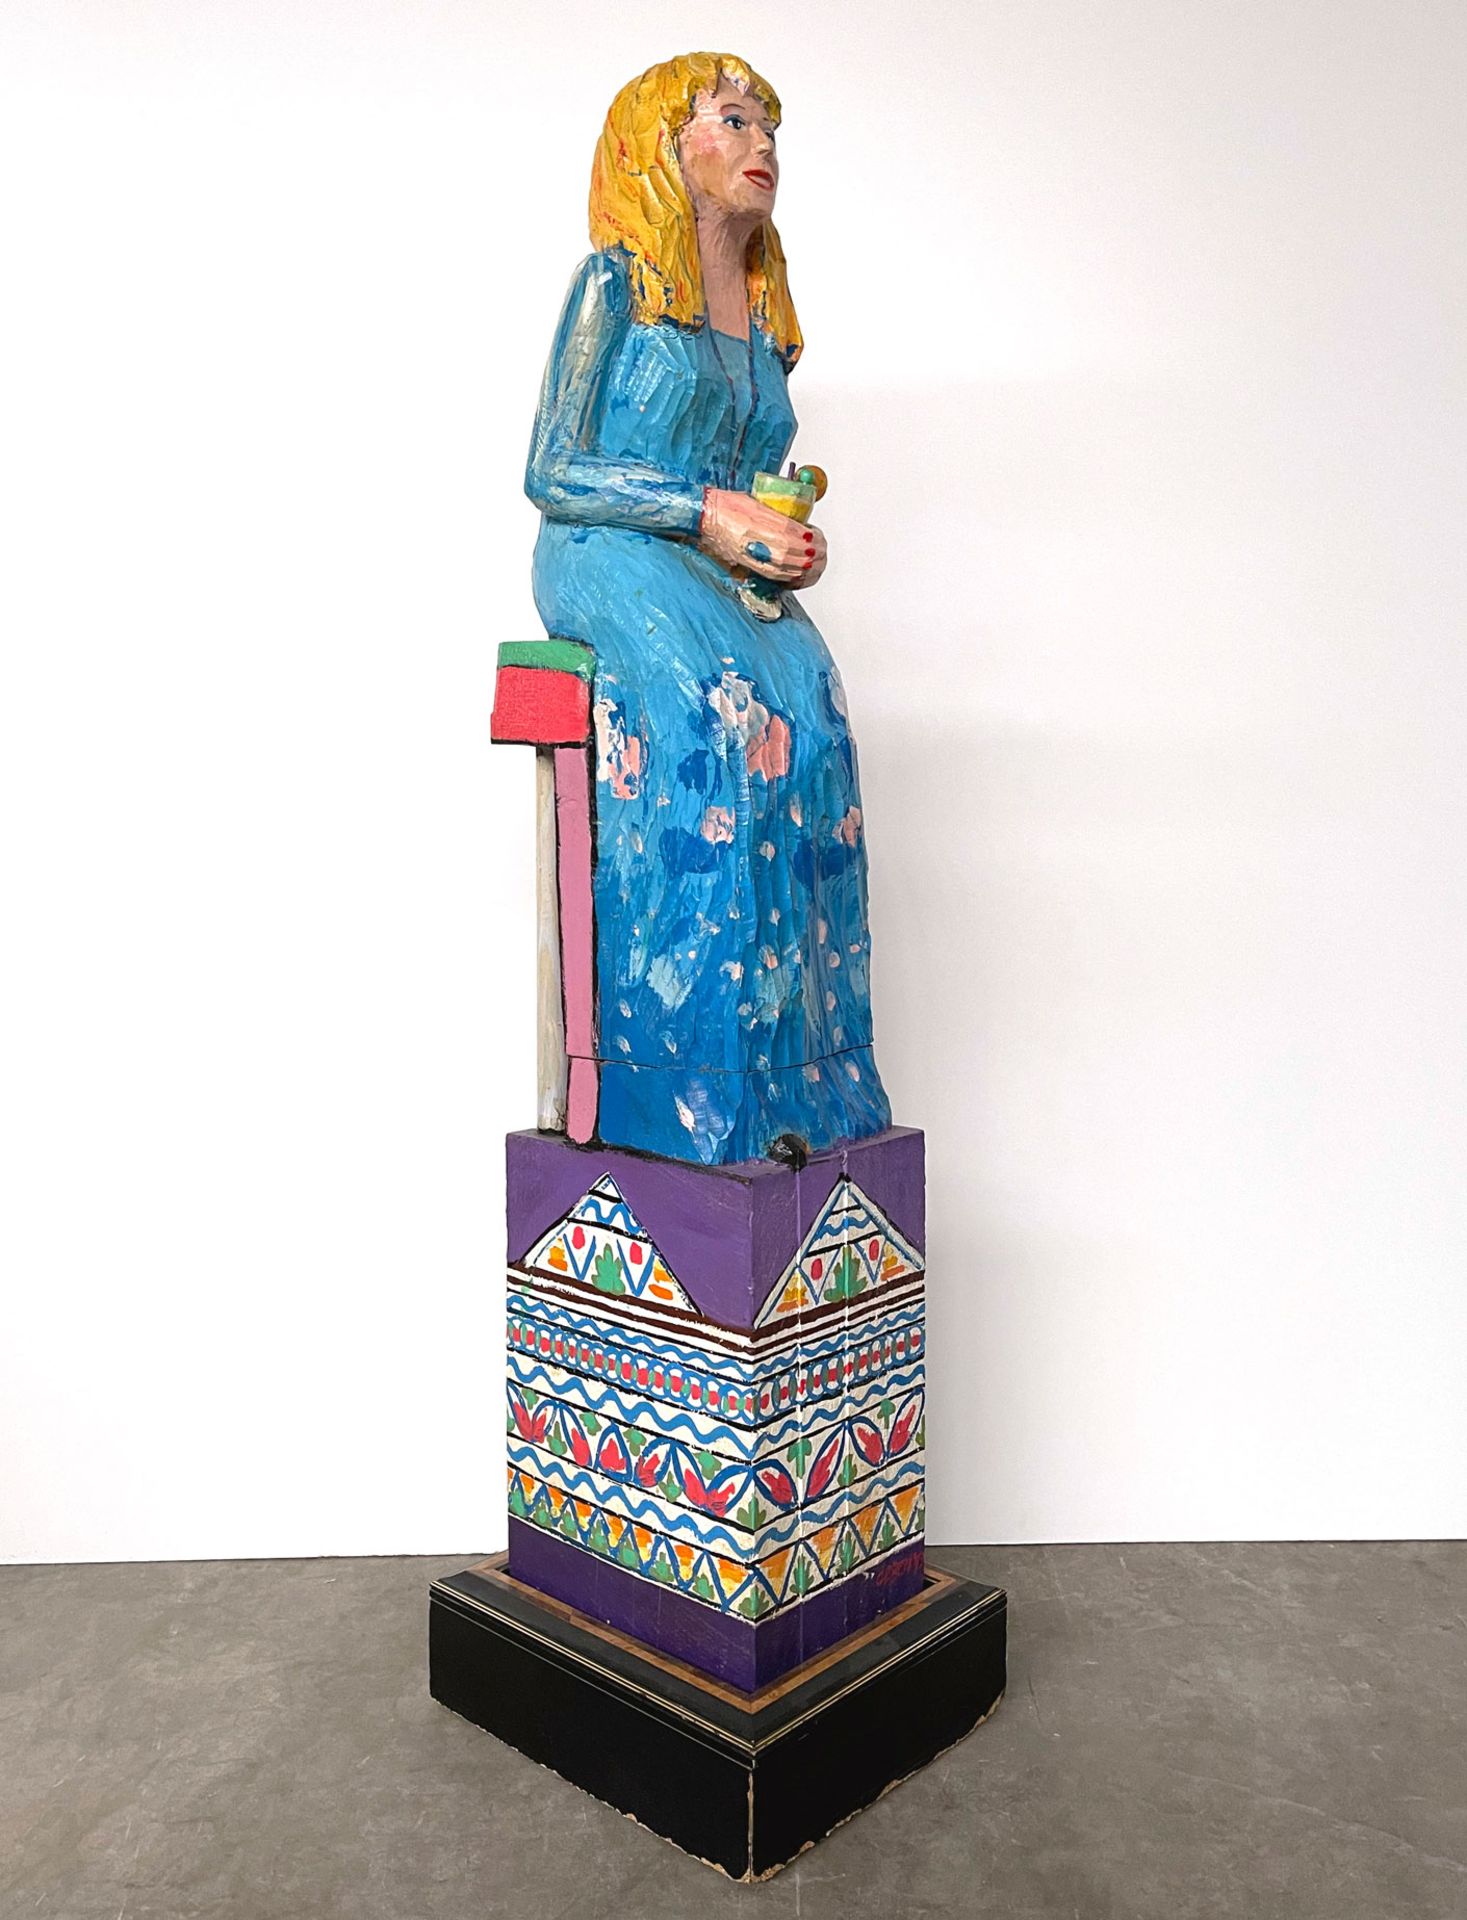 Wooden Statue Depicting a Woman on a Chair with Cocktail - Image 2 of 10